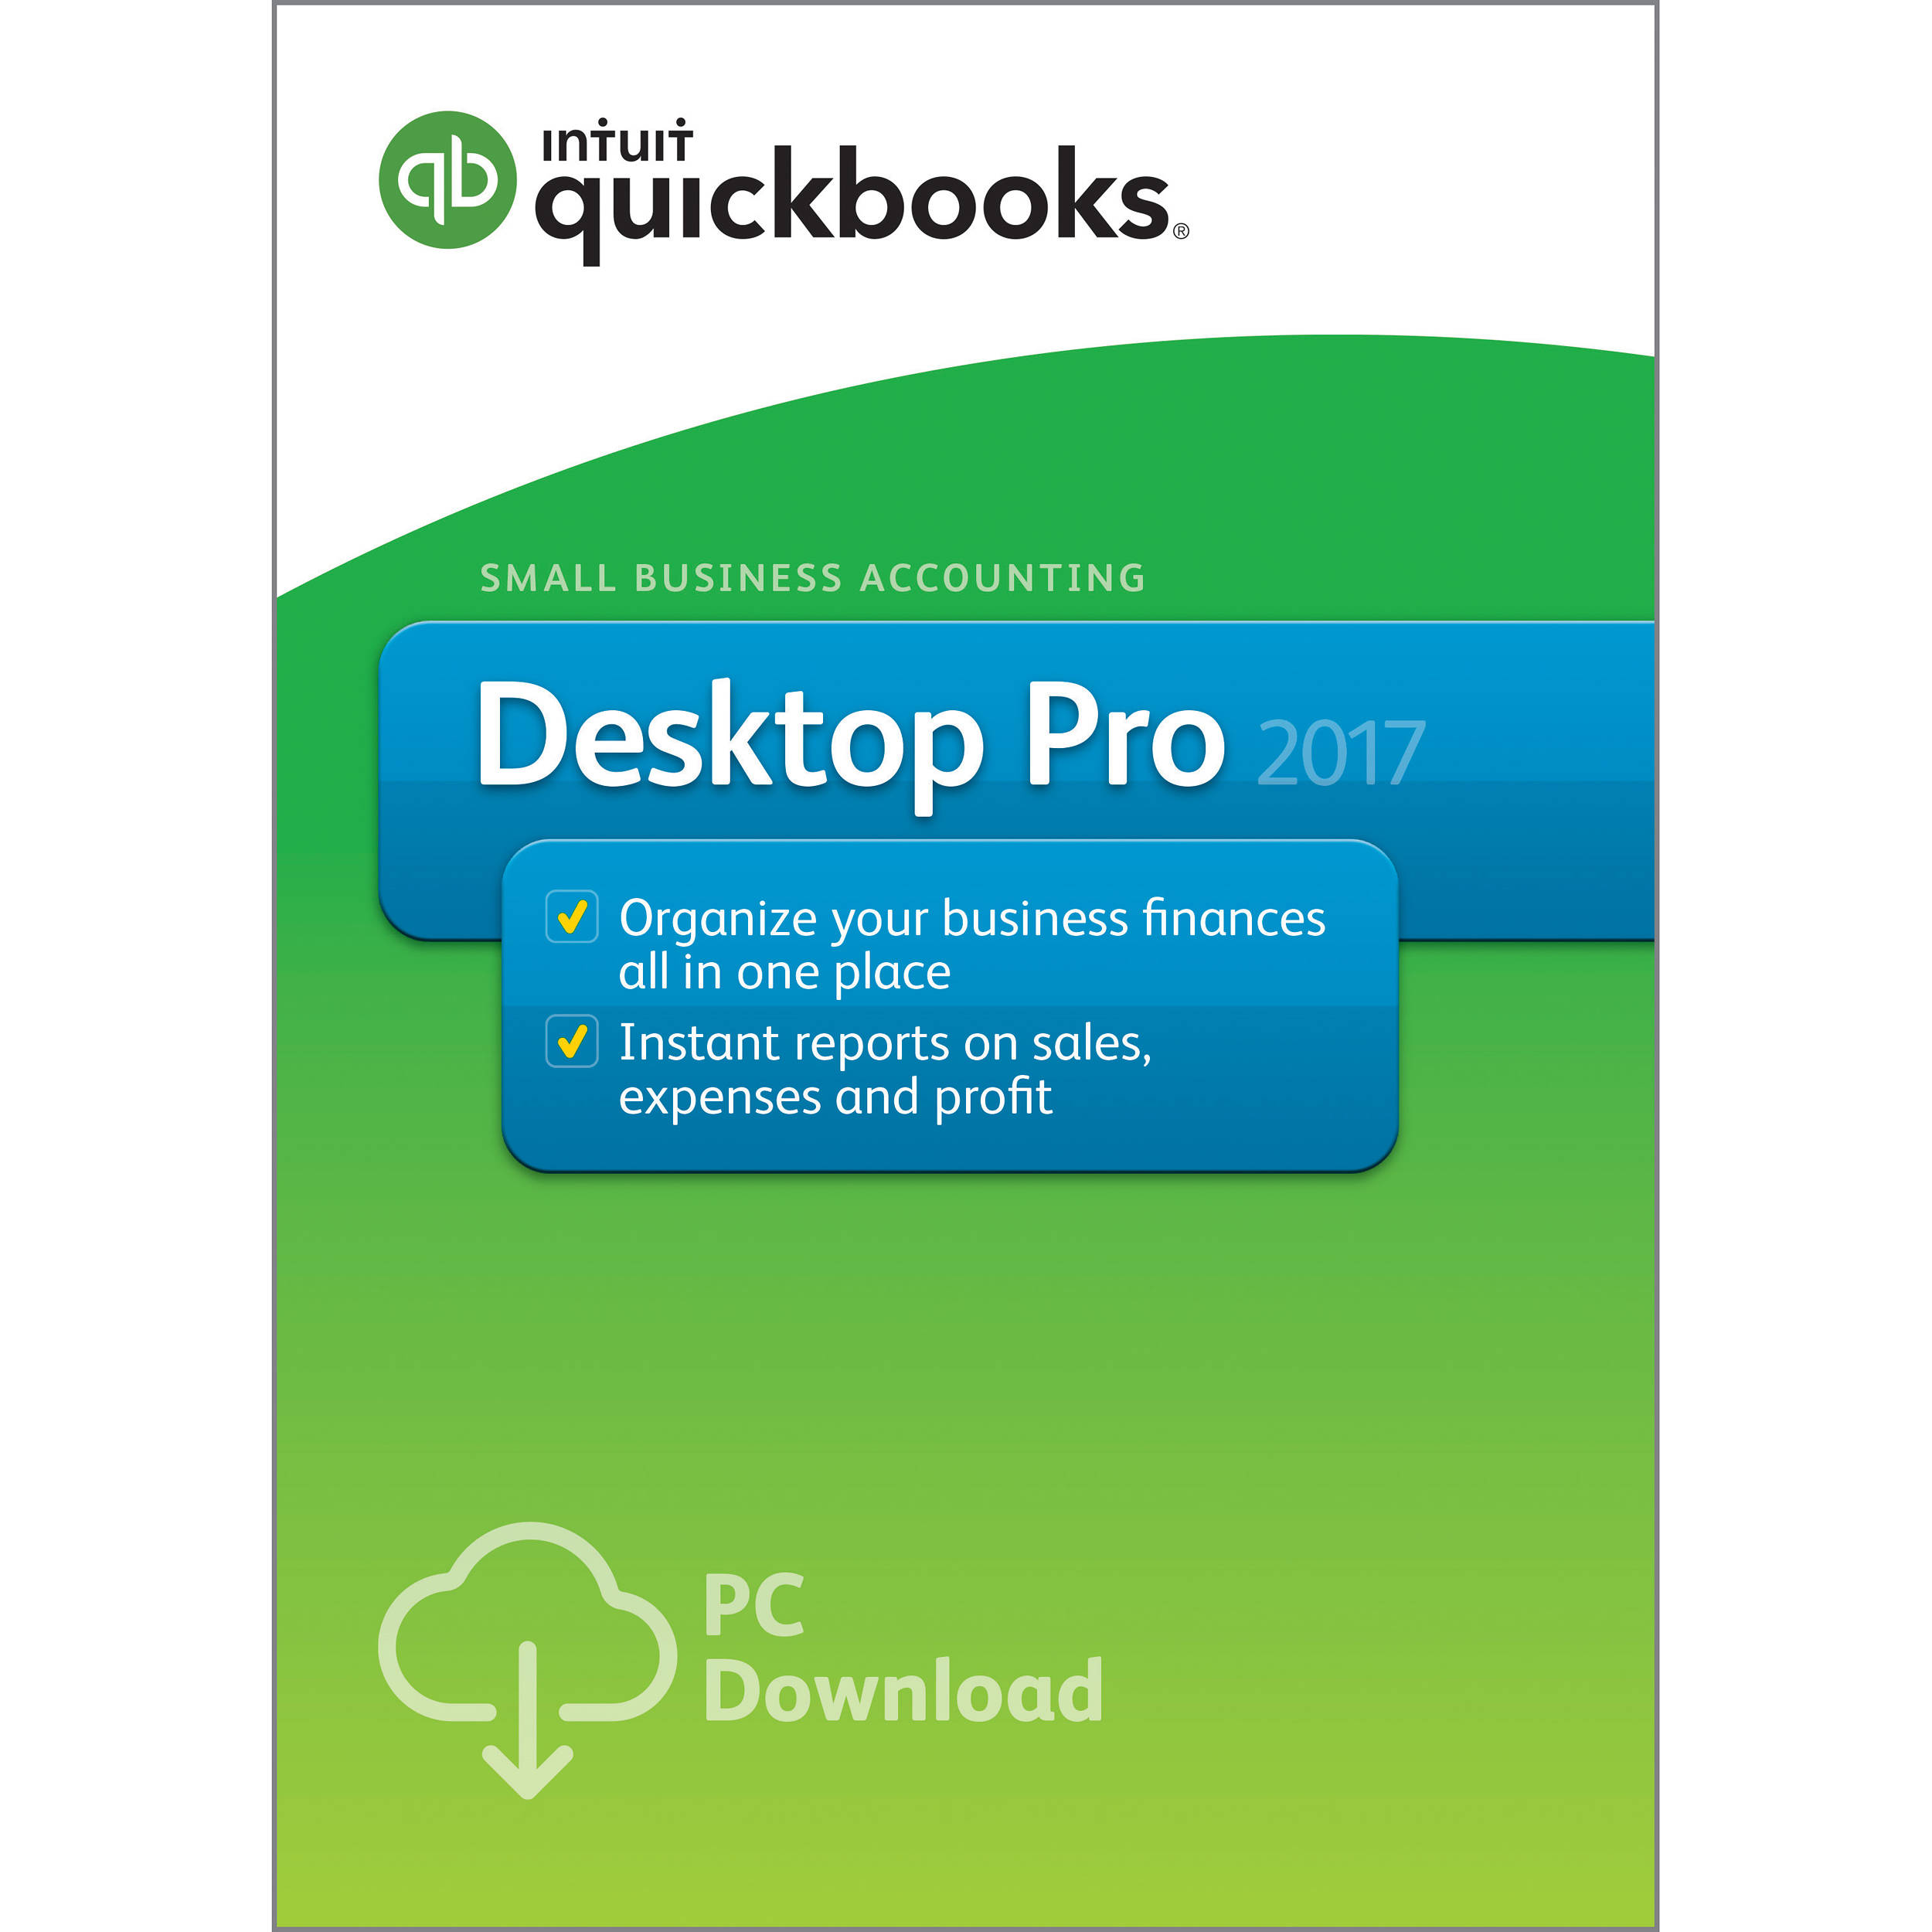 quickbooks system requirements for mac